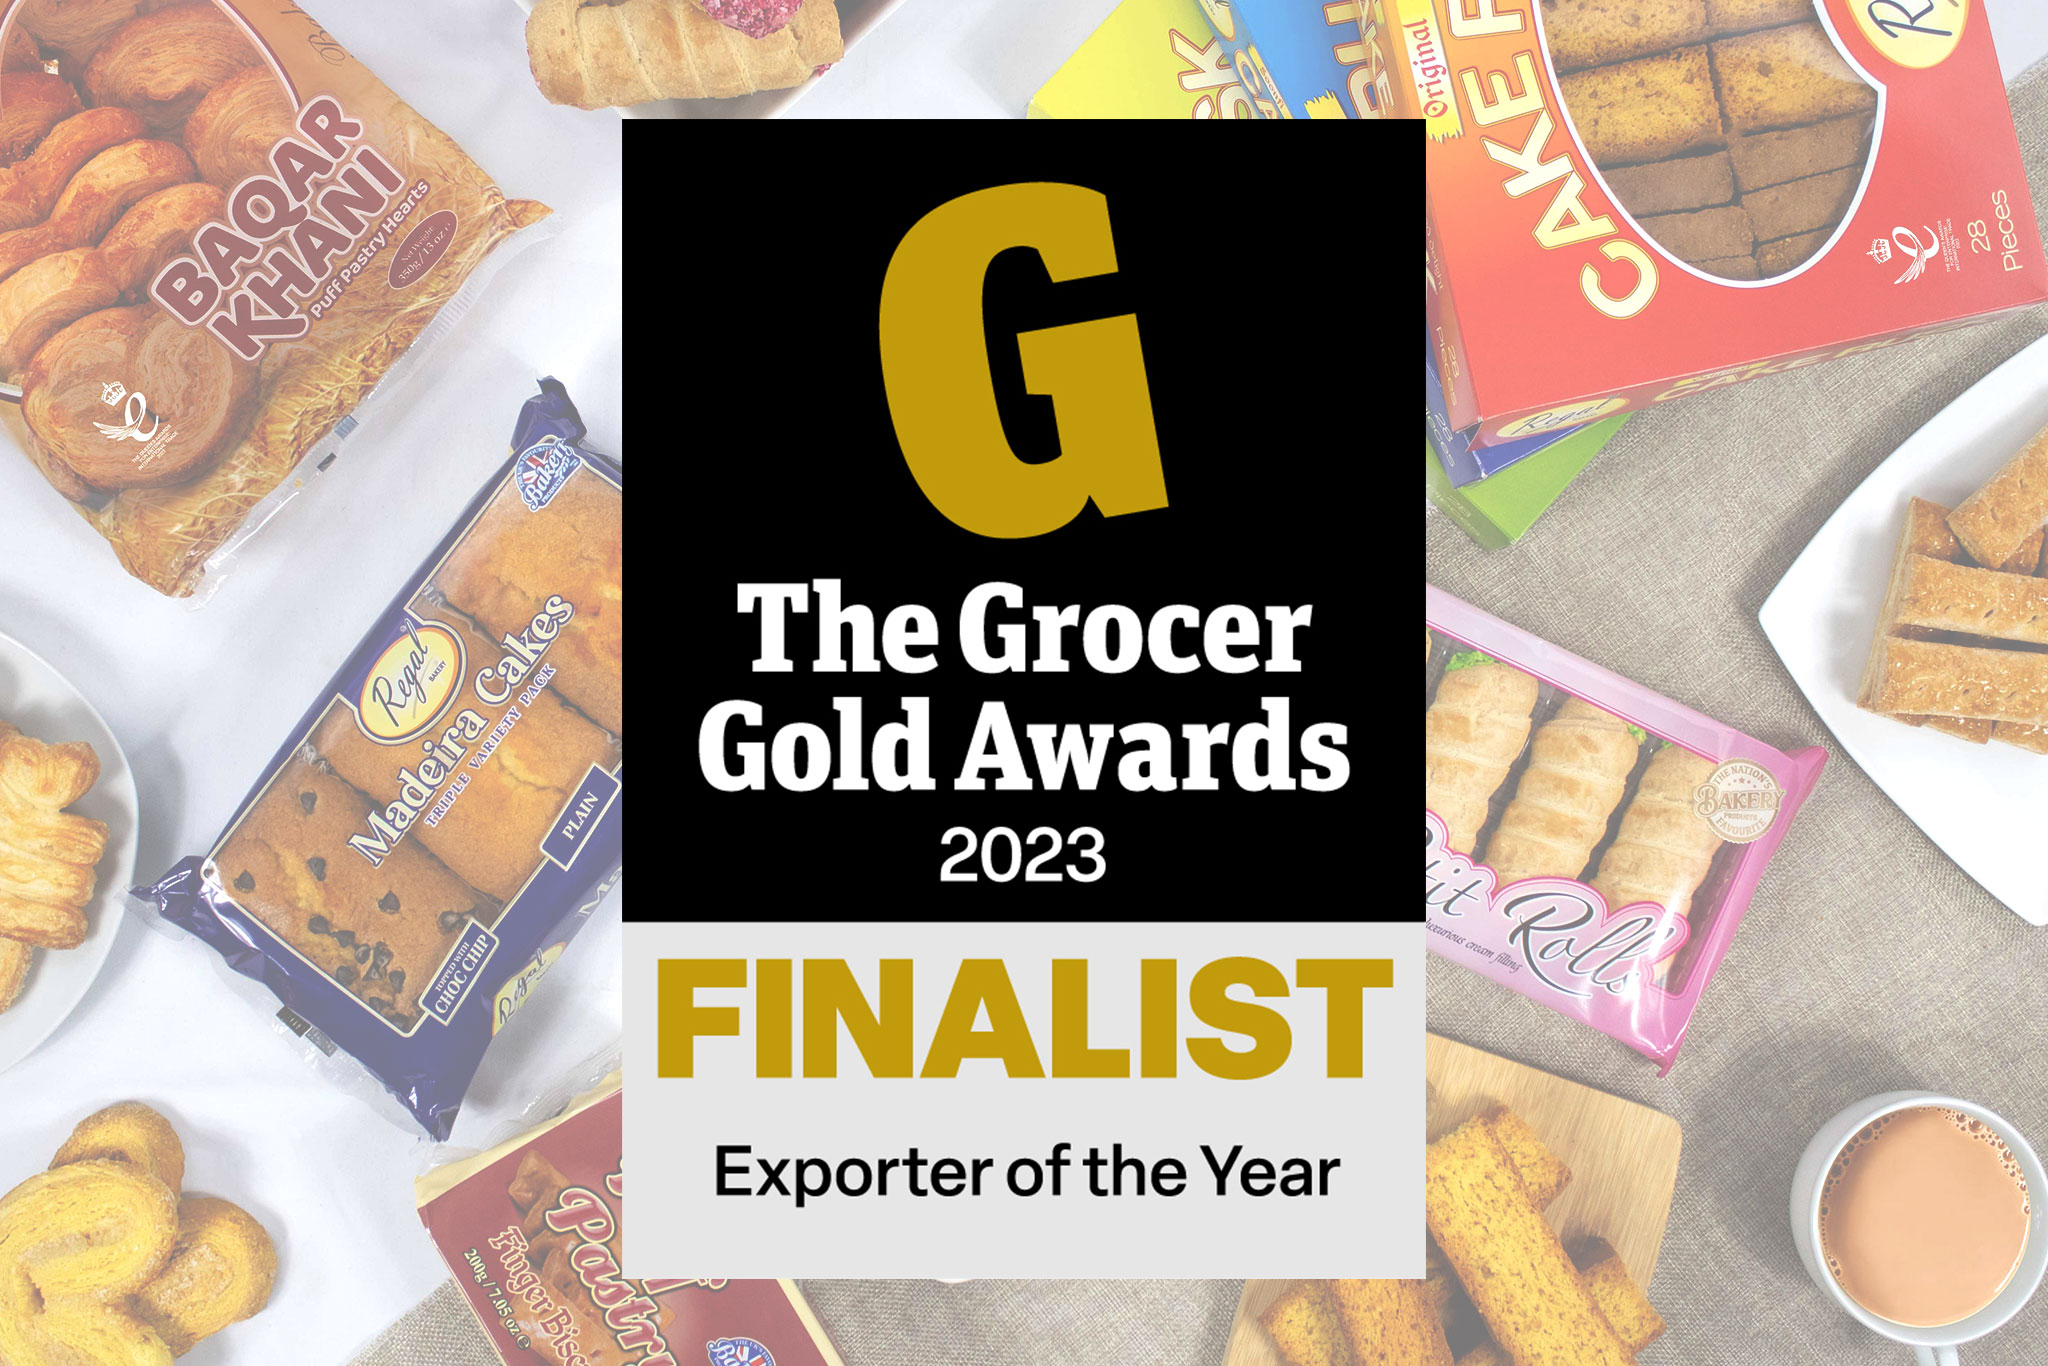 We're excited to share we've been selected as a finalist in the Exporter of the Year category at The Grocer Gold Awards 2023!